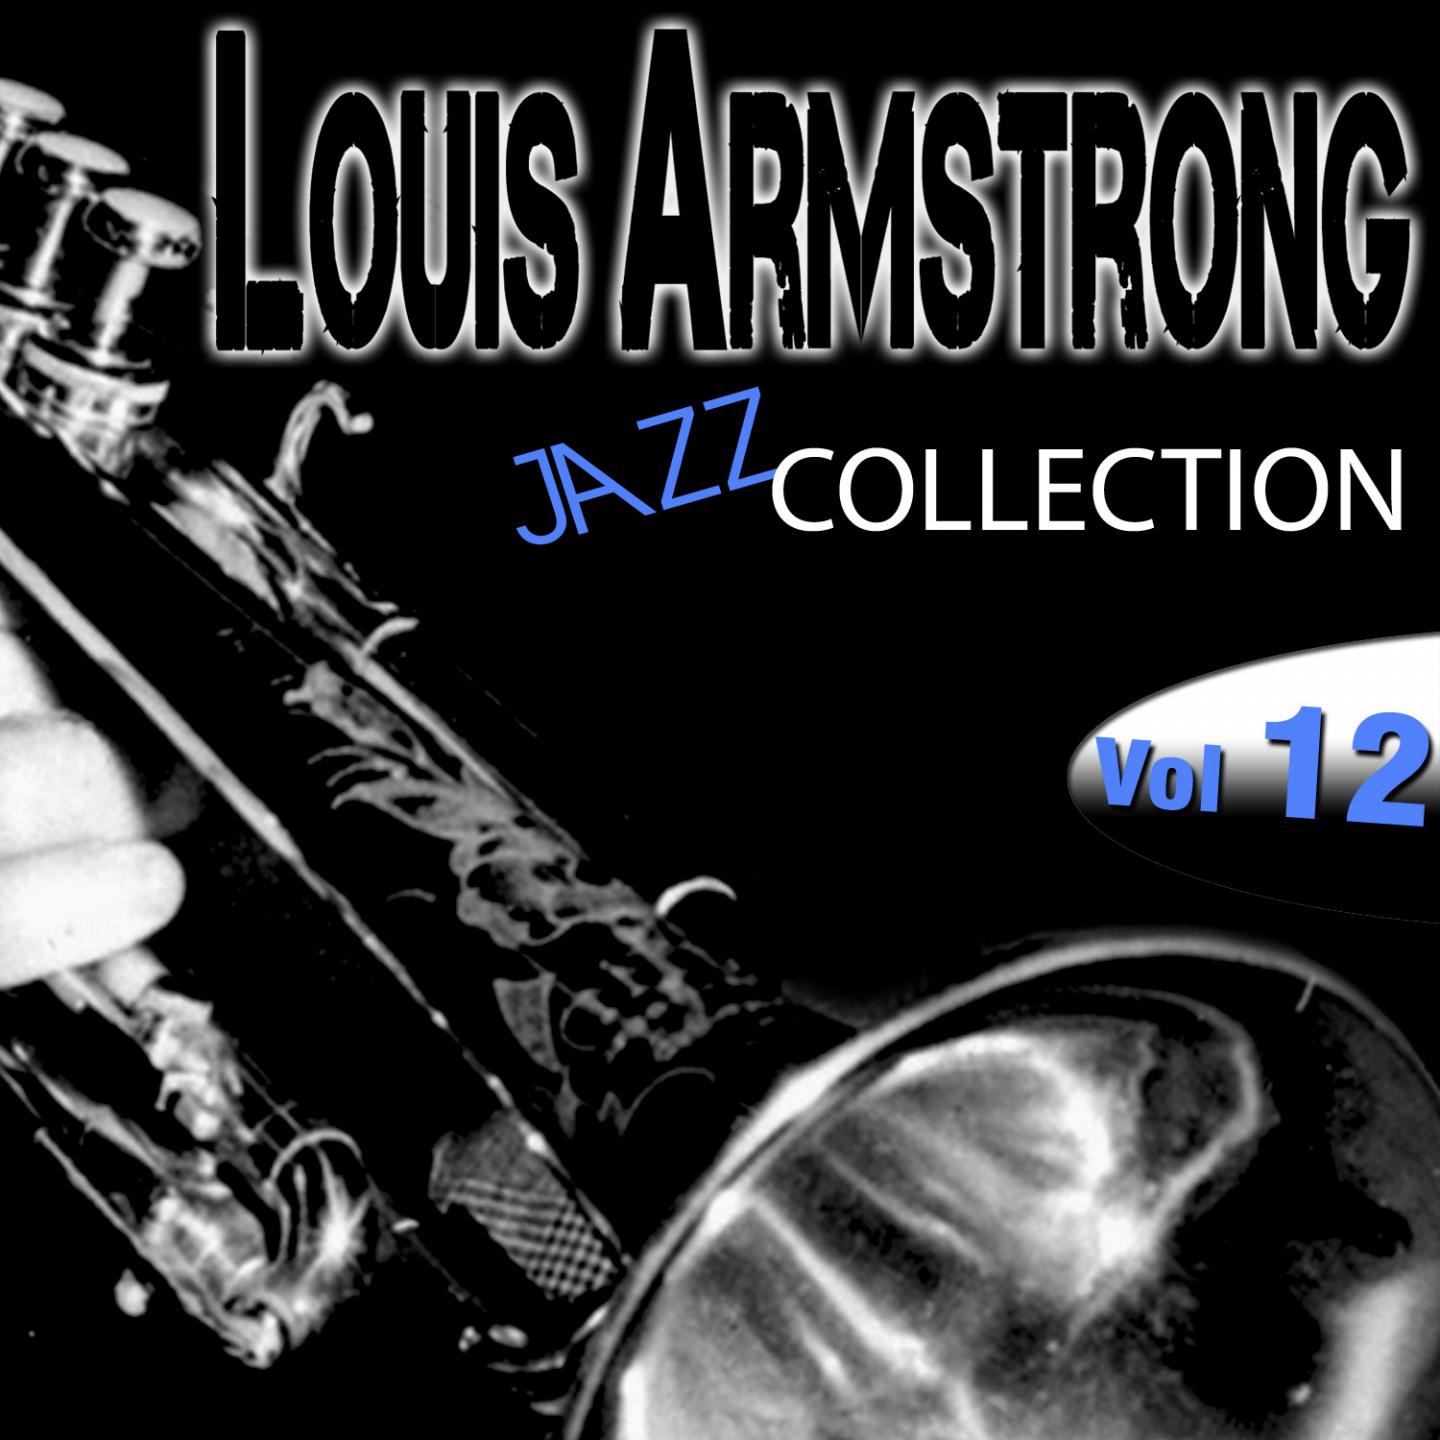 Louis Armstrong Jazz Collection, Vol. 12 (Remastered)专辑